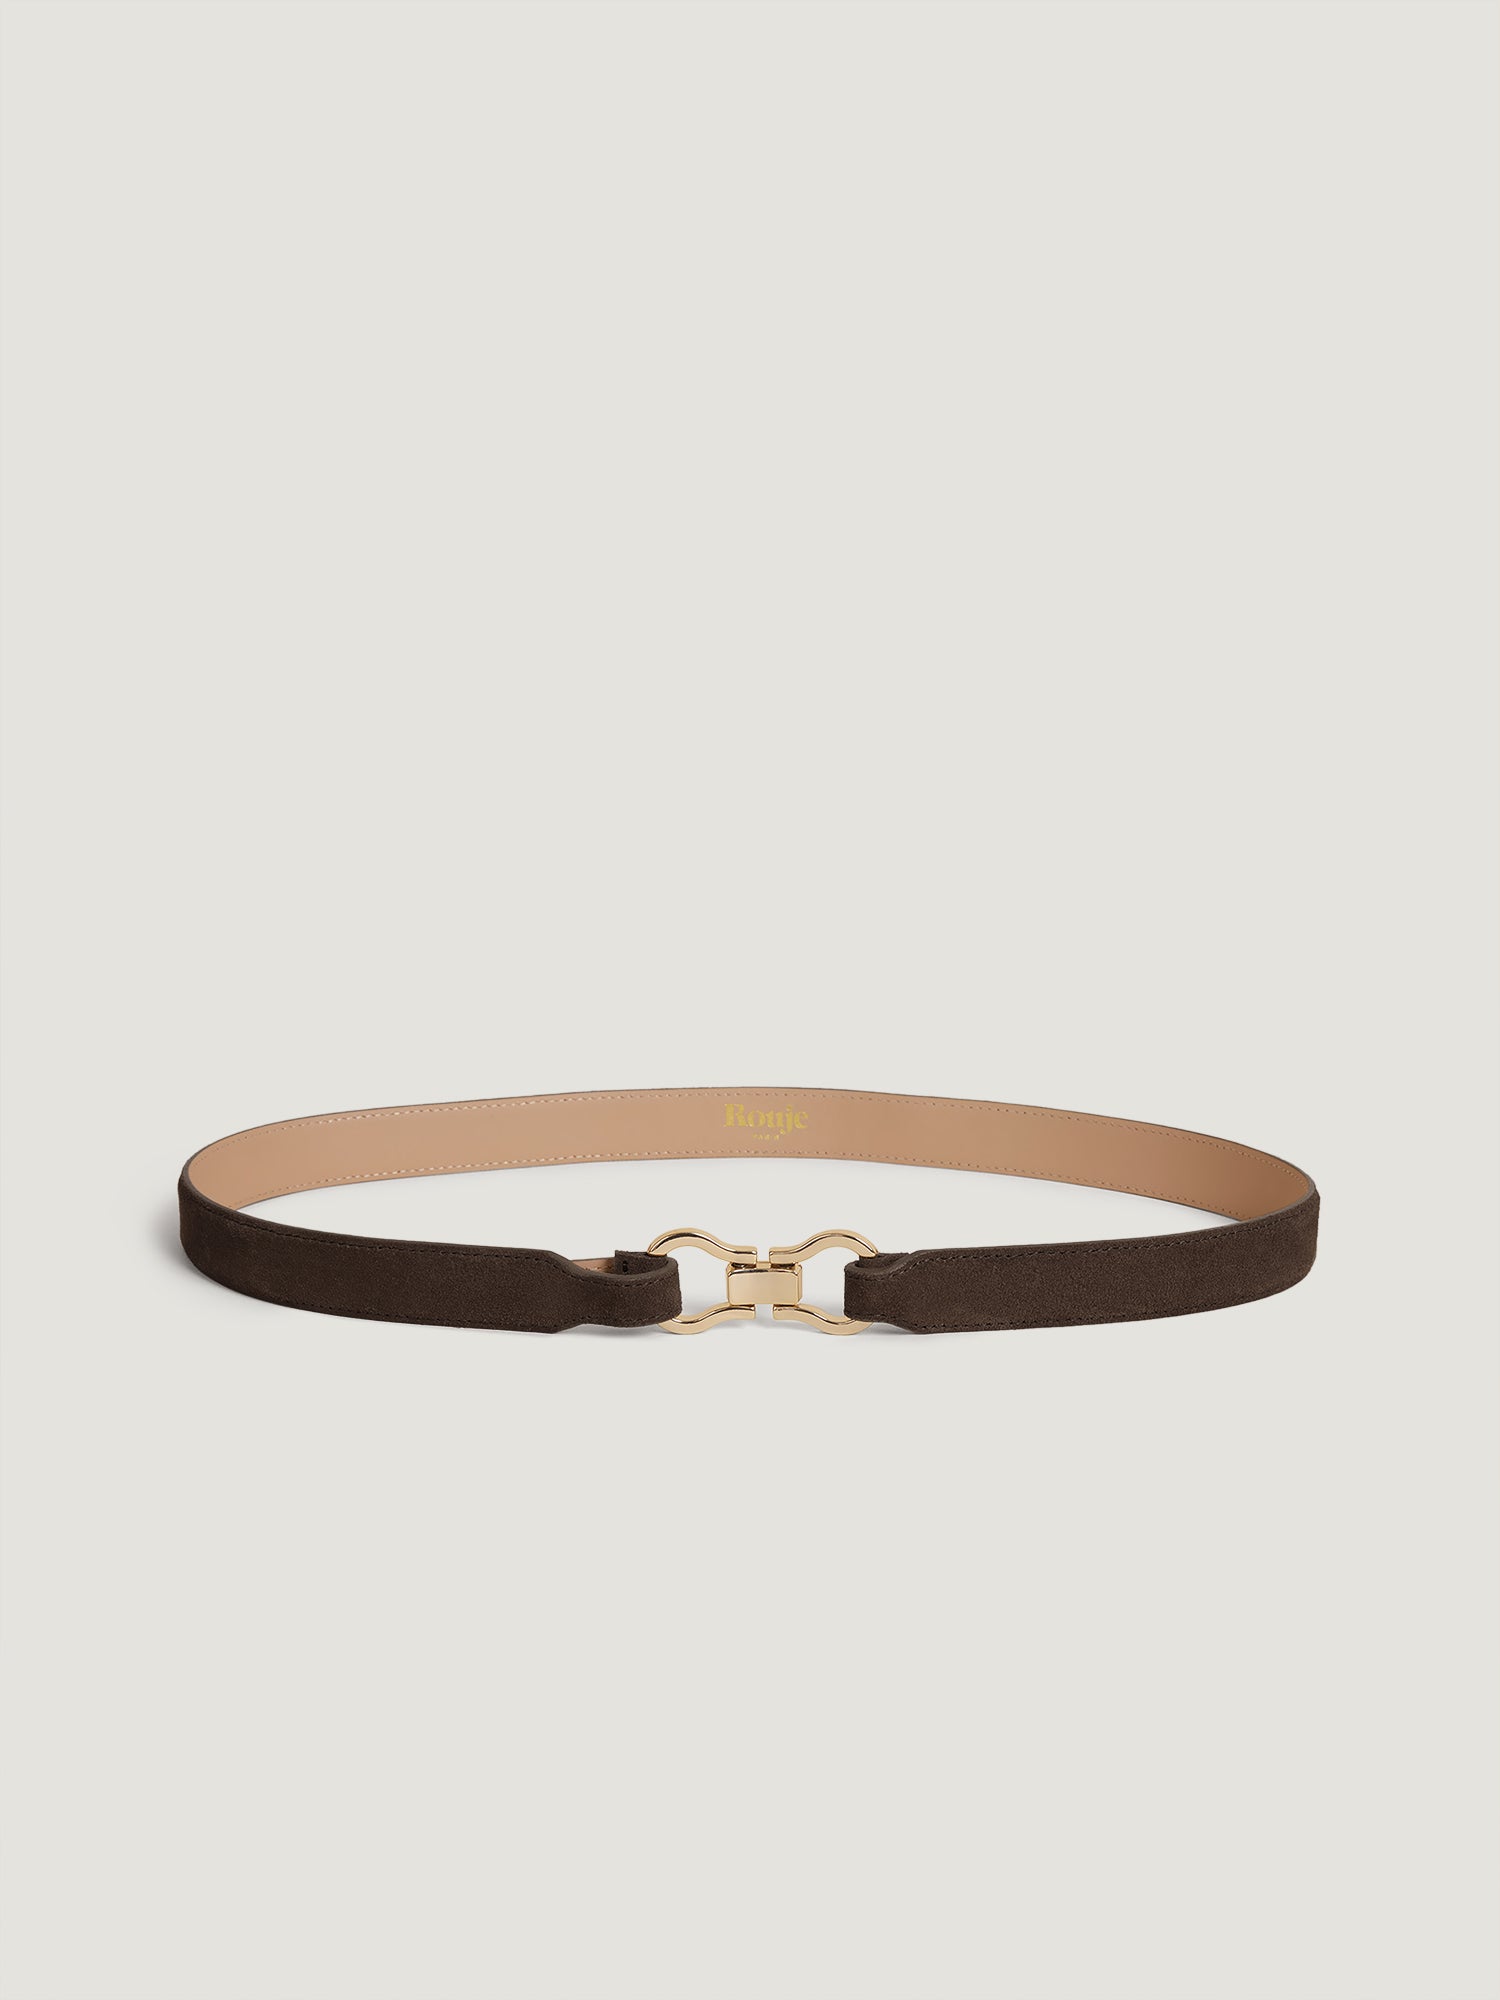 Belt in brown suede leather | Rouje • Rouje Paris